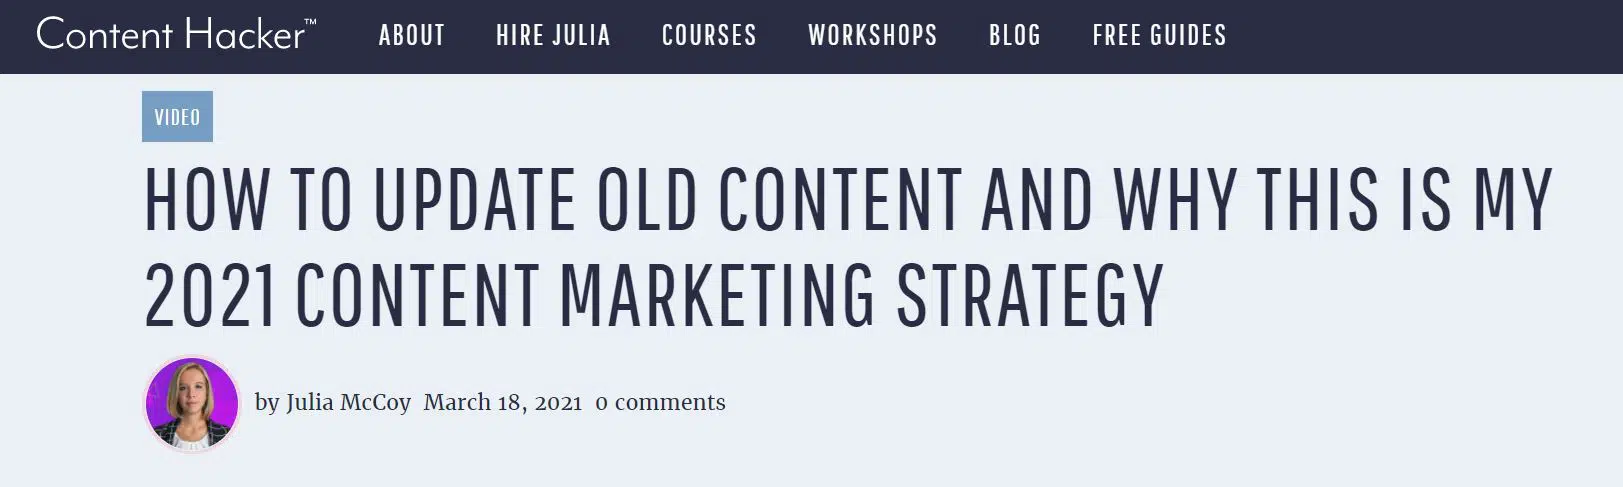 how to update old content blog